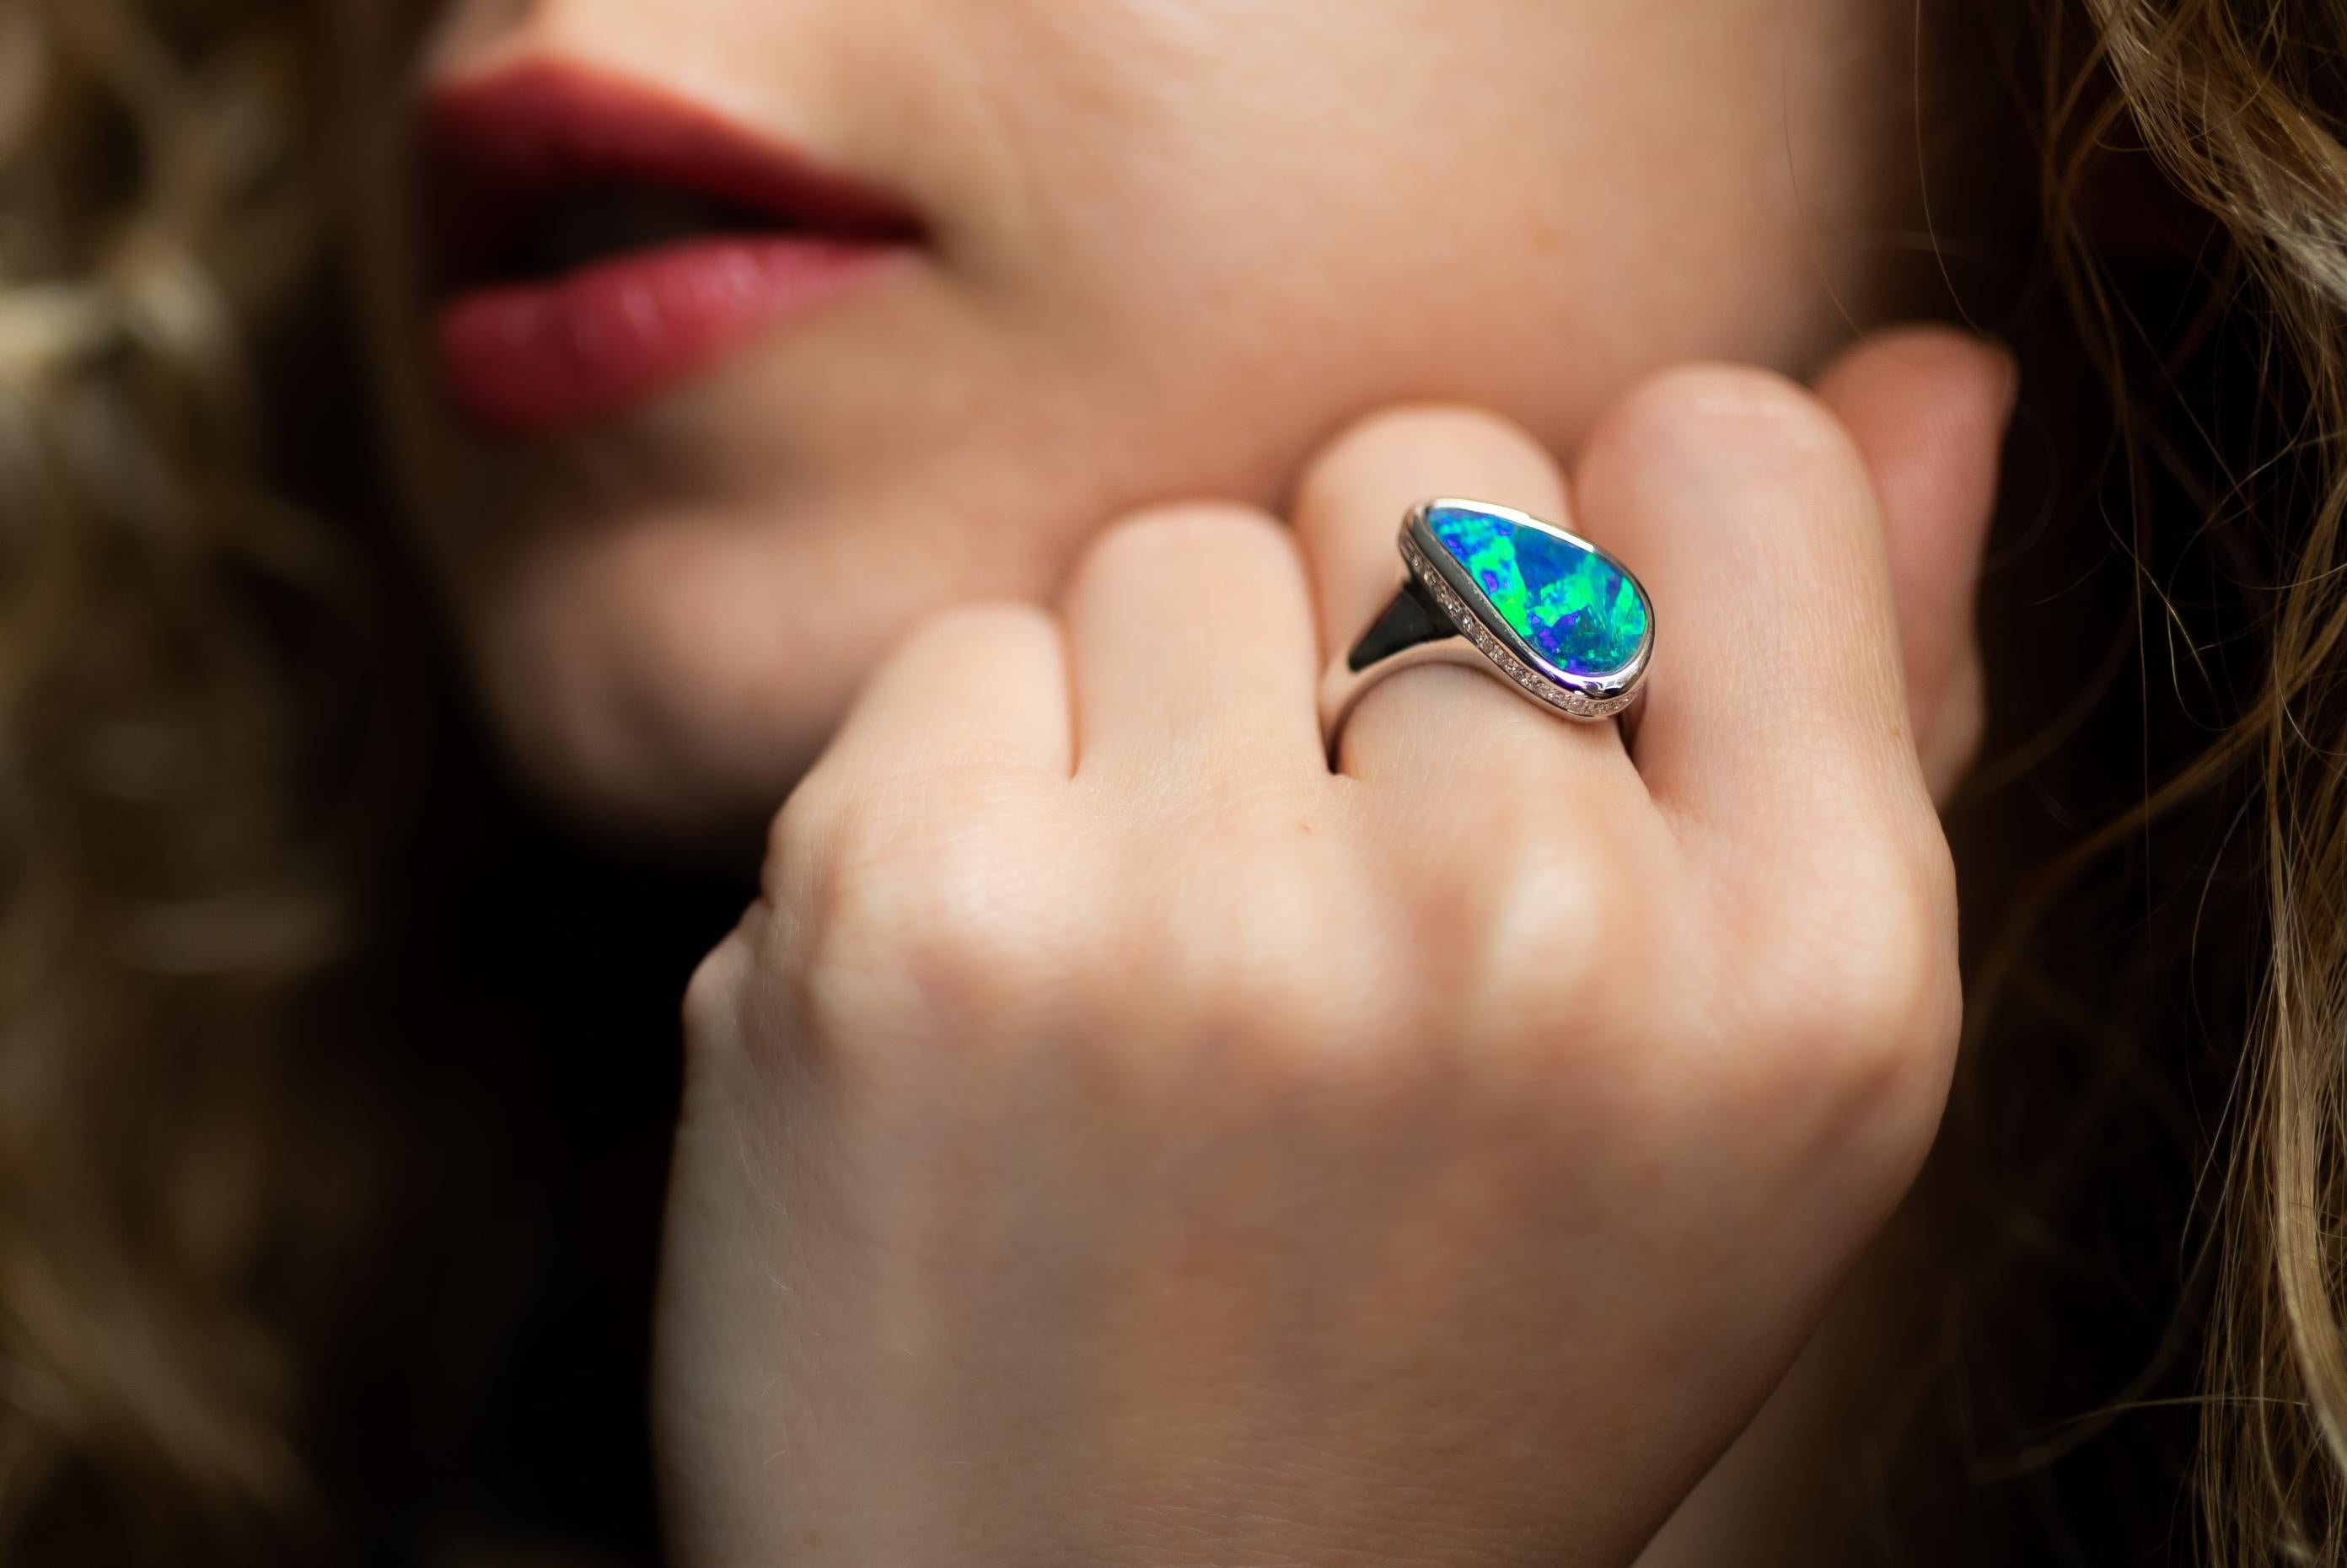 Spectacular 4.80ct Australian national gem comes from mines in Winton. Natural boulder opal shows off vibrant greens and blues that will surprise you forever. Complimented by 37 sparkling diamonds, set in the 18K white bed. Kakadu is waiting for